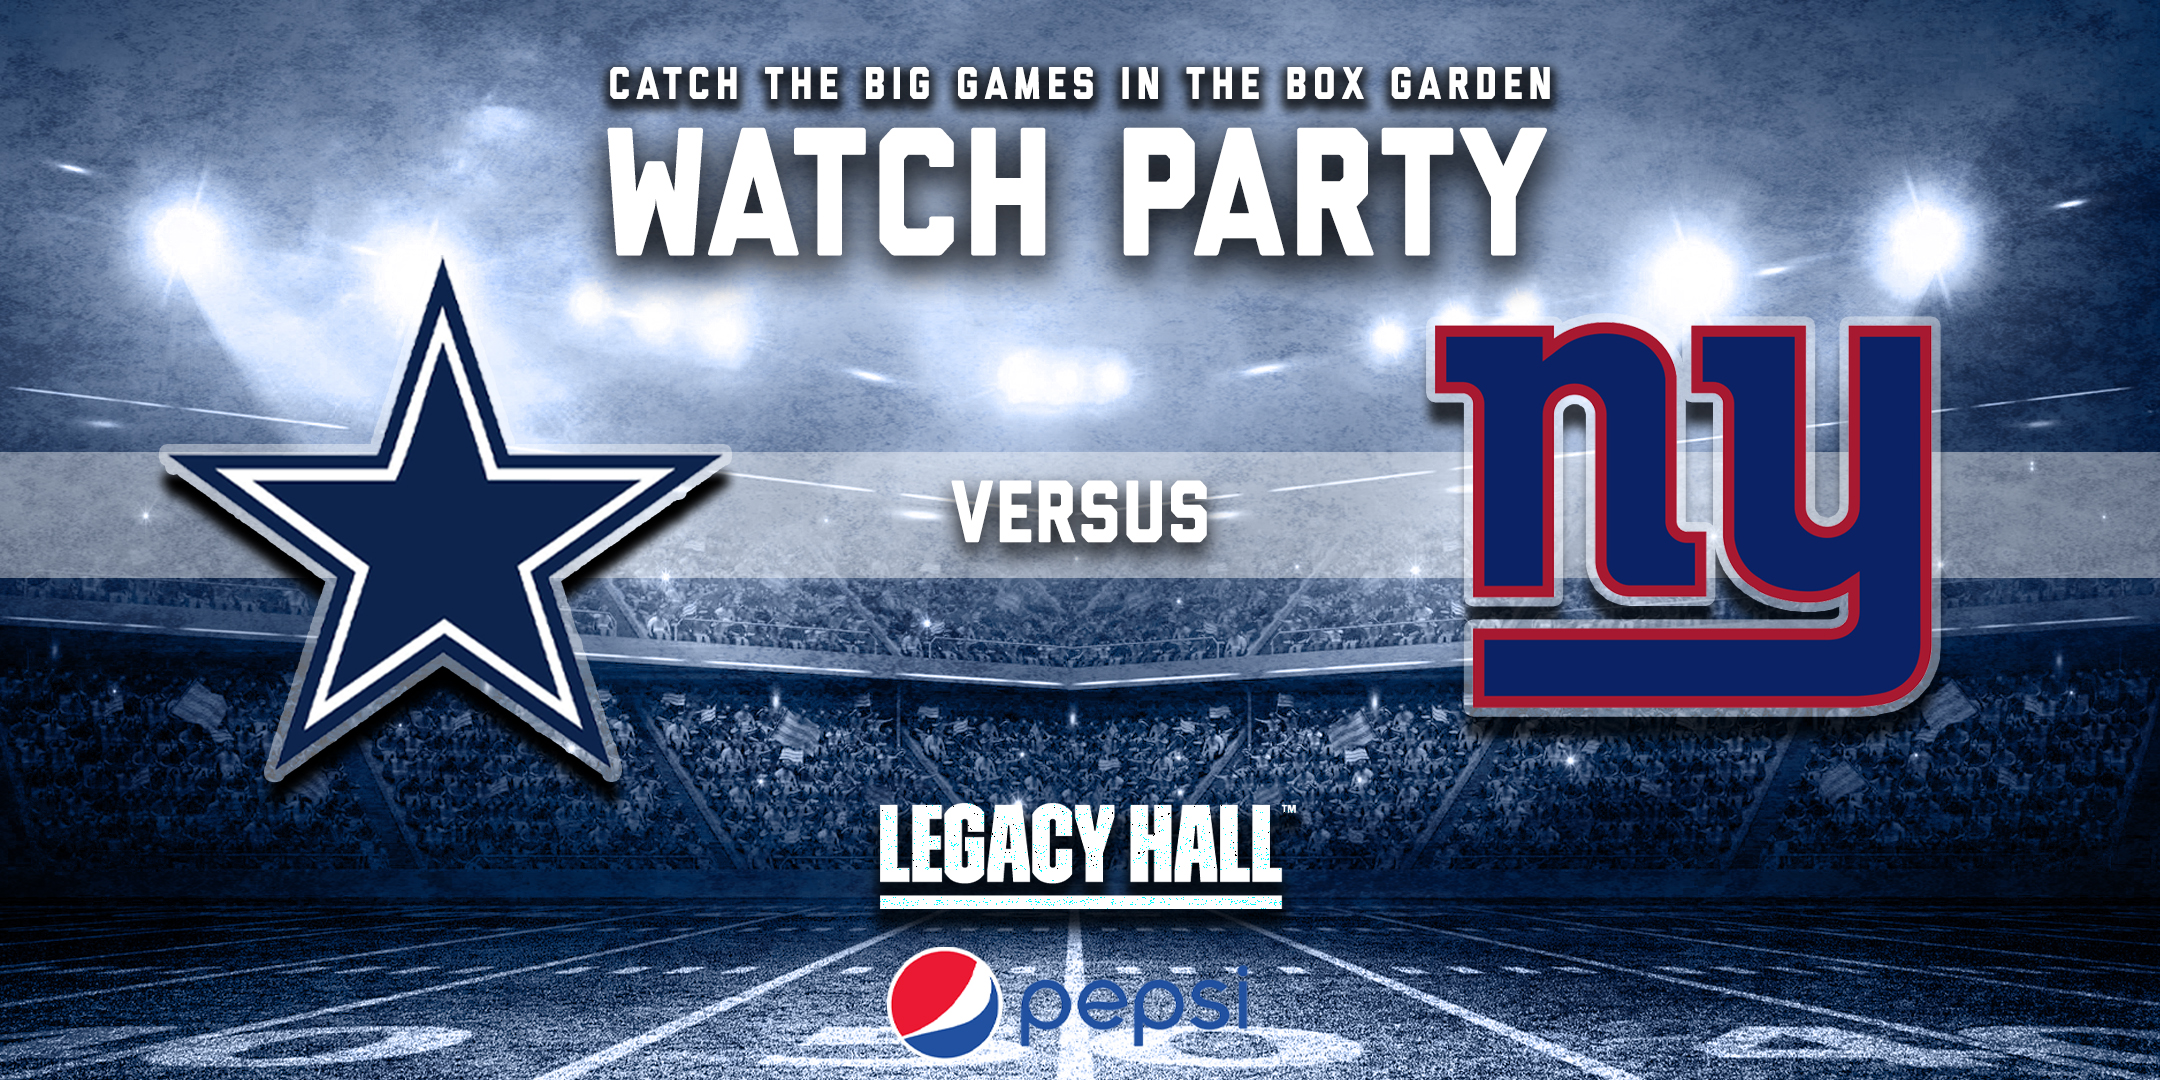 Cowboys vs. Giants Watch Party